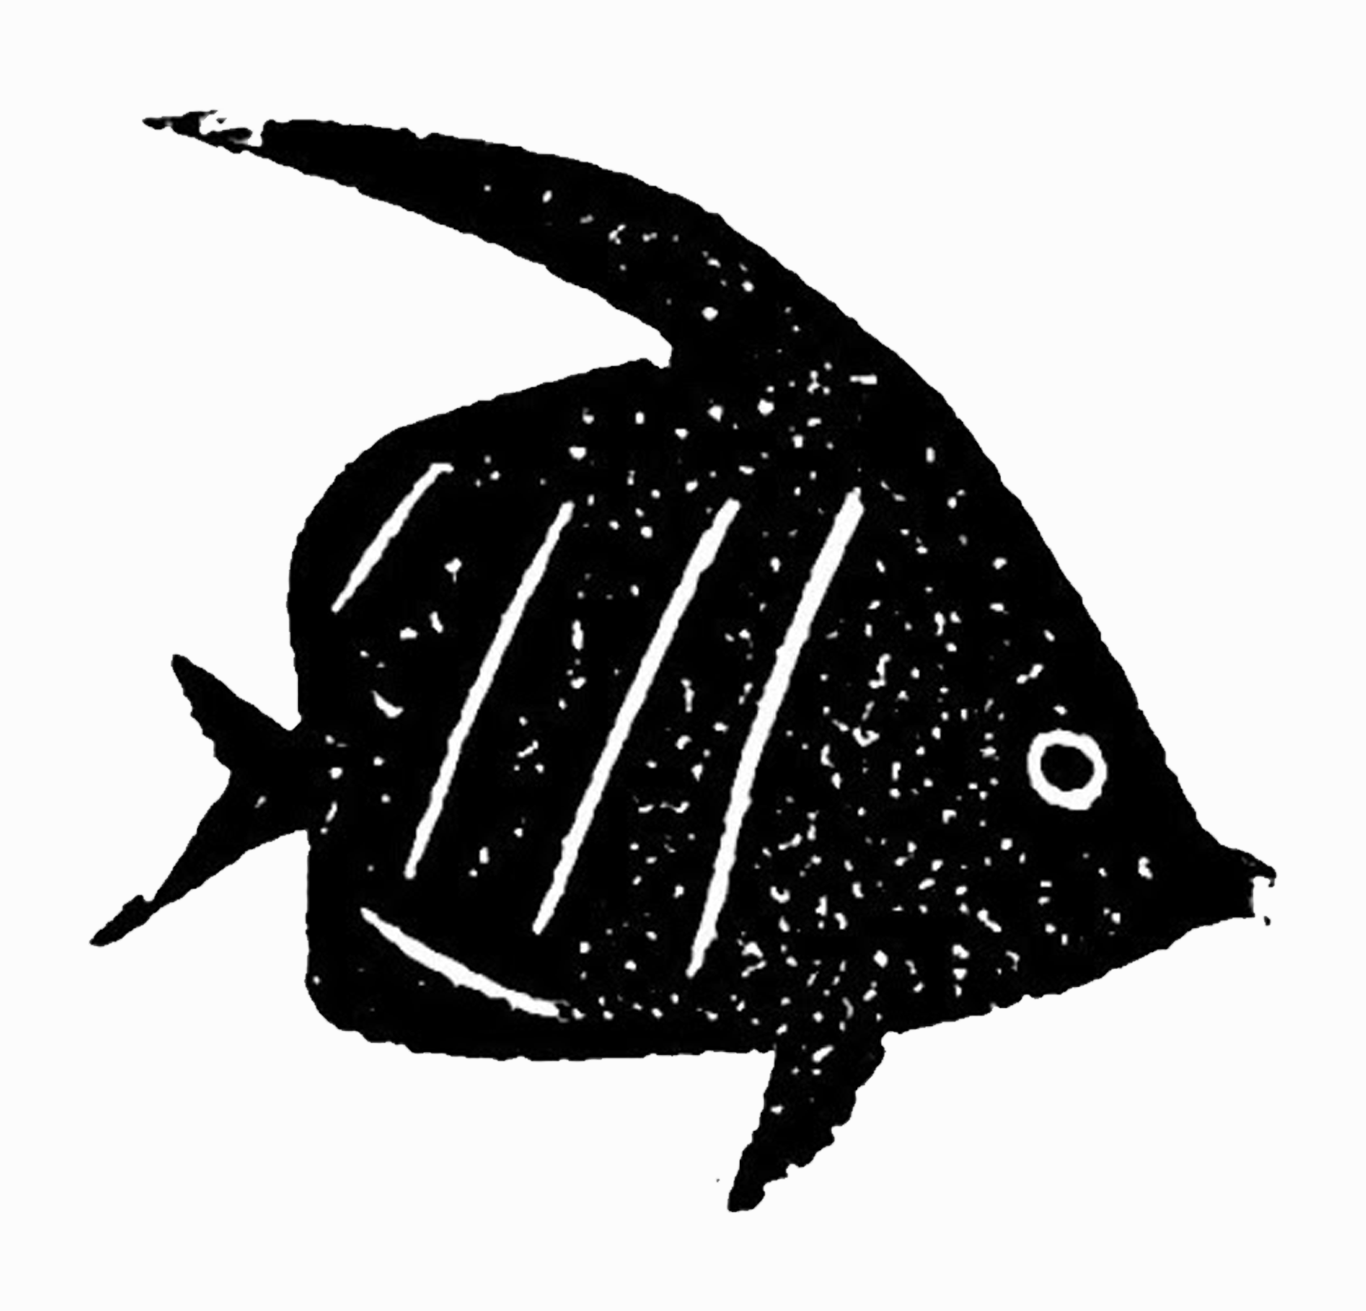 Somewhat grainy black-and-white linocut print of a simply stylized tropical fish, centered on a slightly off-white background.